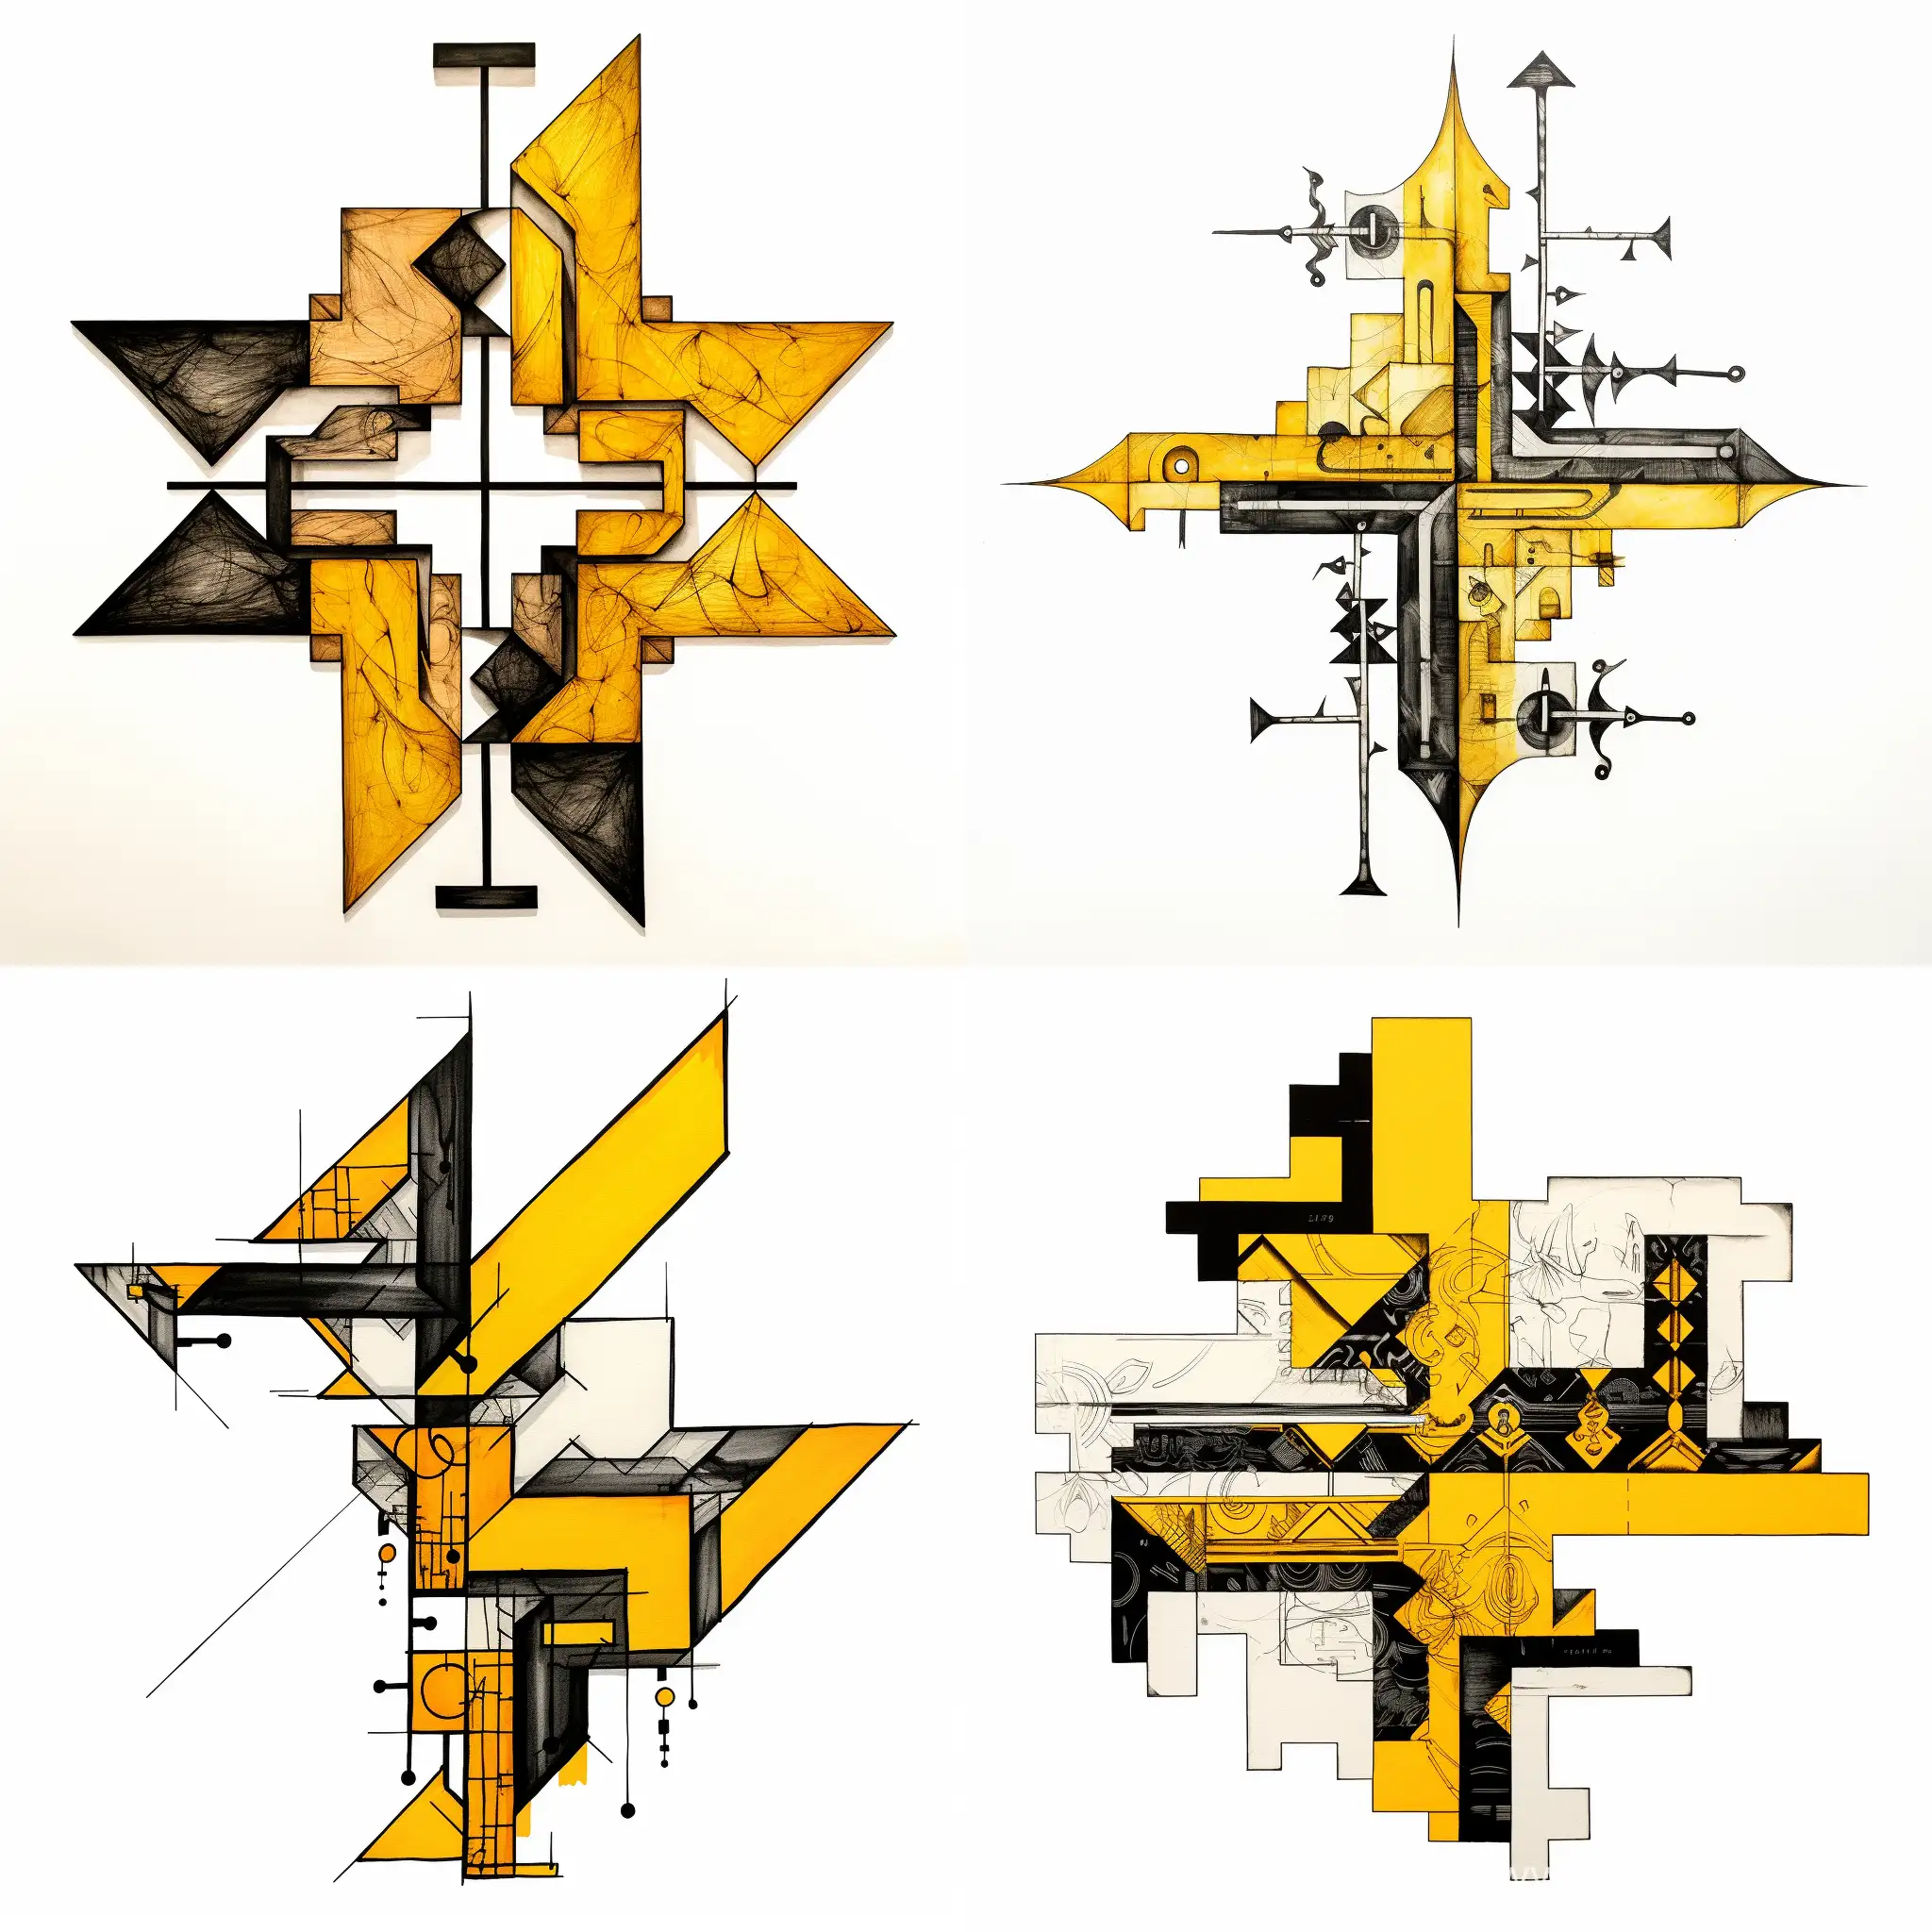 Abstract-Puzzle-Art-with-Upward-Arrow-in-Black-and-Yellow-on-White-Background